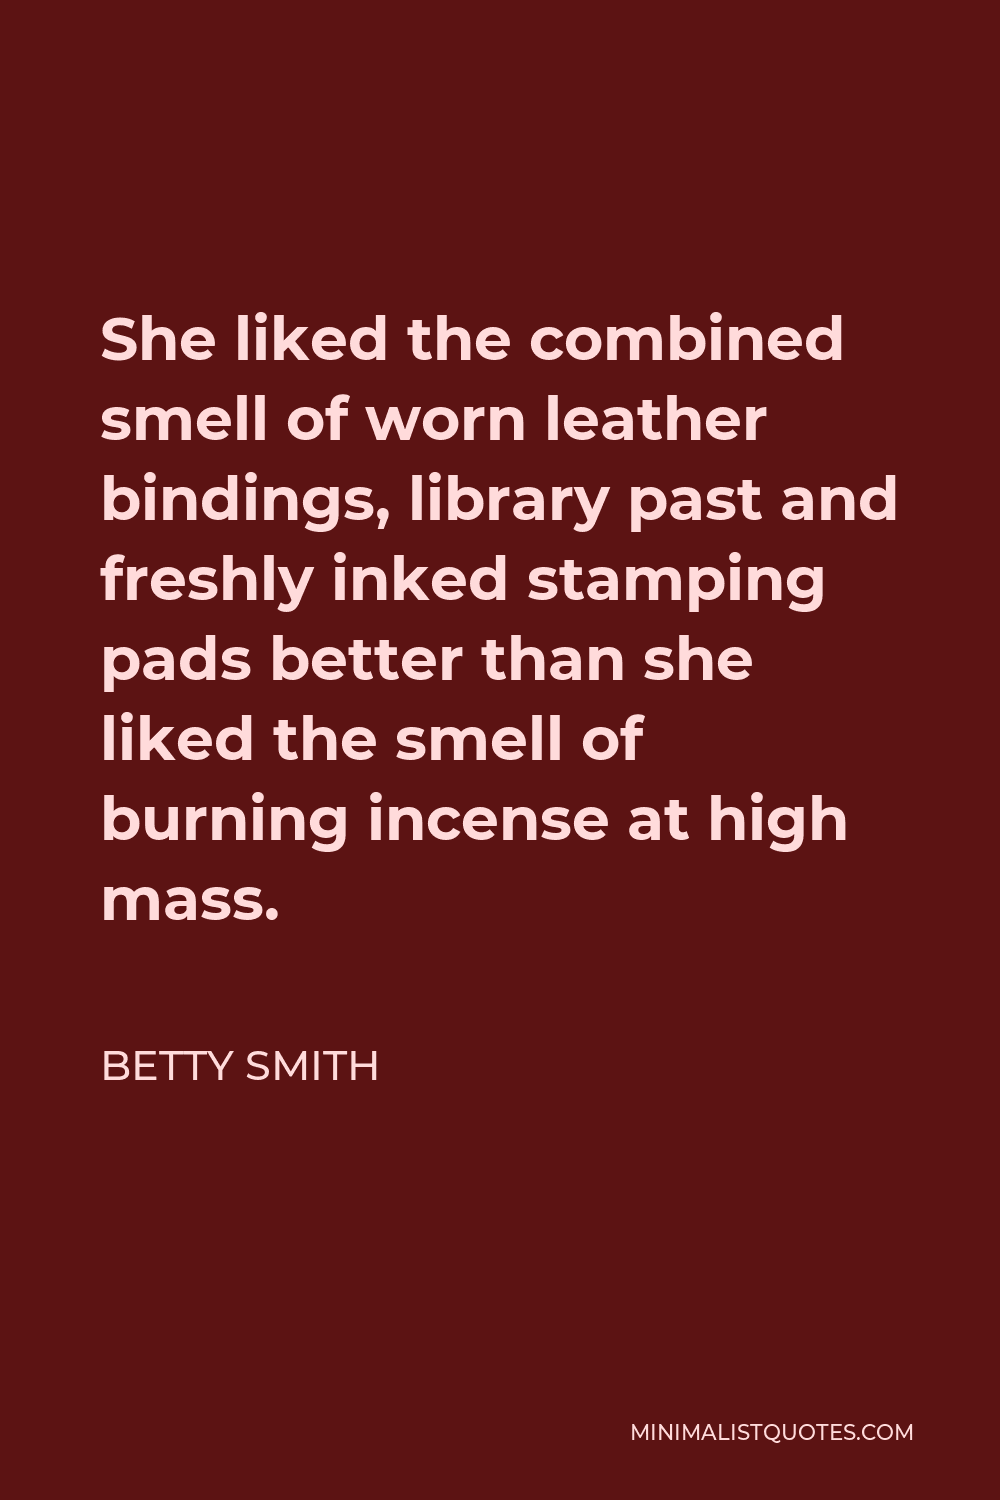 Betty Smith Quote - She liked the combined smell of worn leather bindings, library past and freshly inked stamping pads better than she liked the smell of burning incense at high mass.